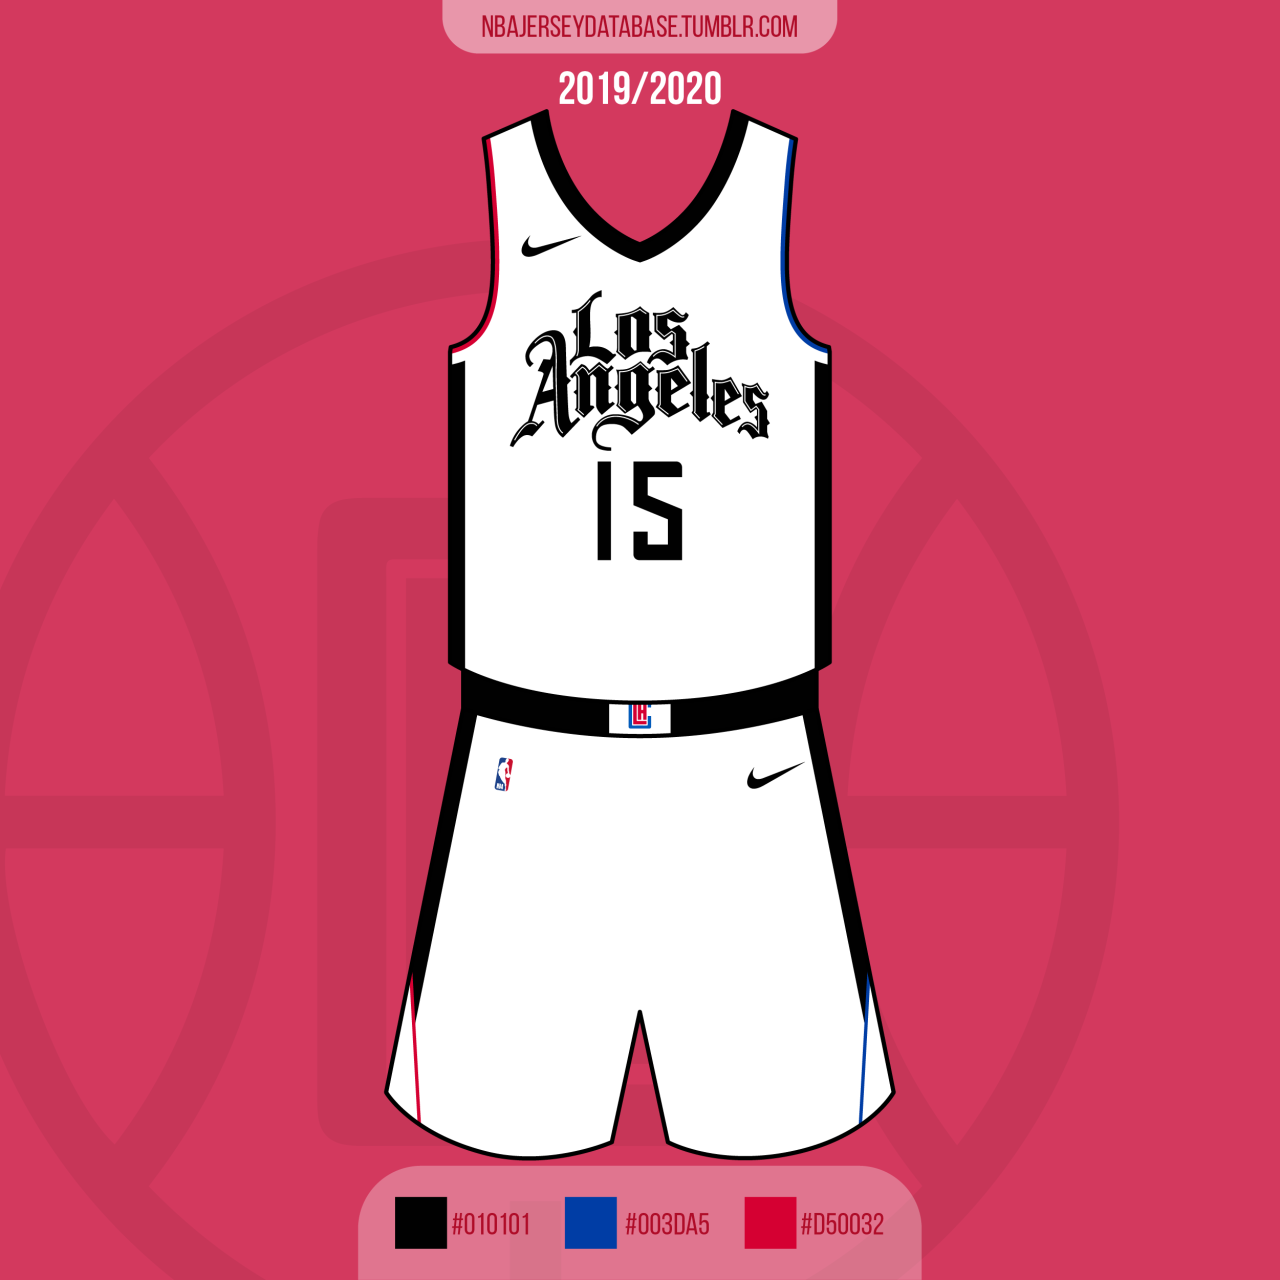 NBA Jersey Database, Los Angeles Clippers City Jersey 2019-2020